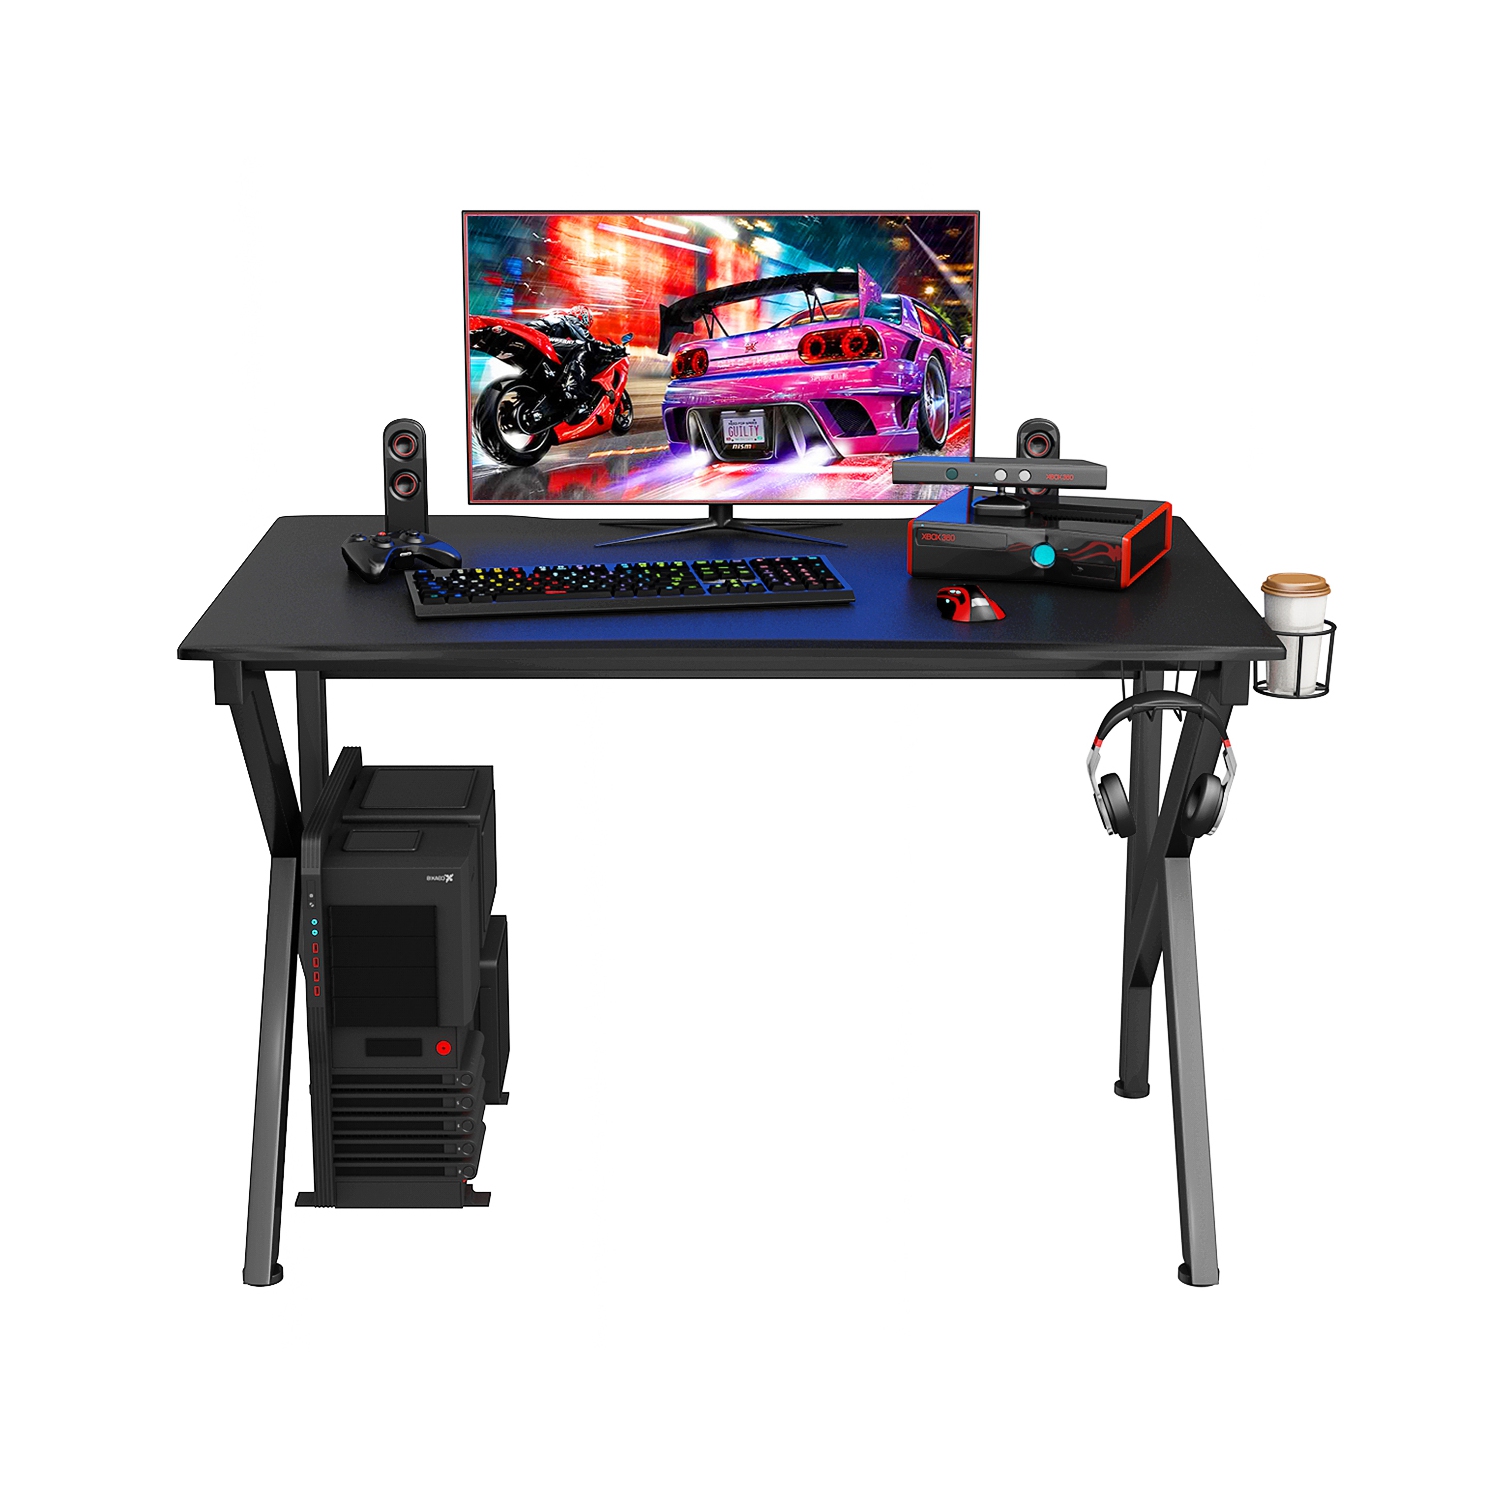 Costway Gaming Computer Desk - Gamers Table - E-Sports - K-Shaped Legs w/ Cup Holder & Headphone Hook - Black